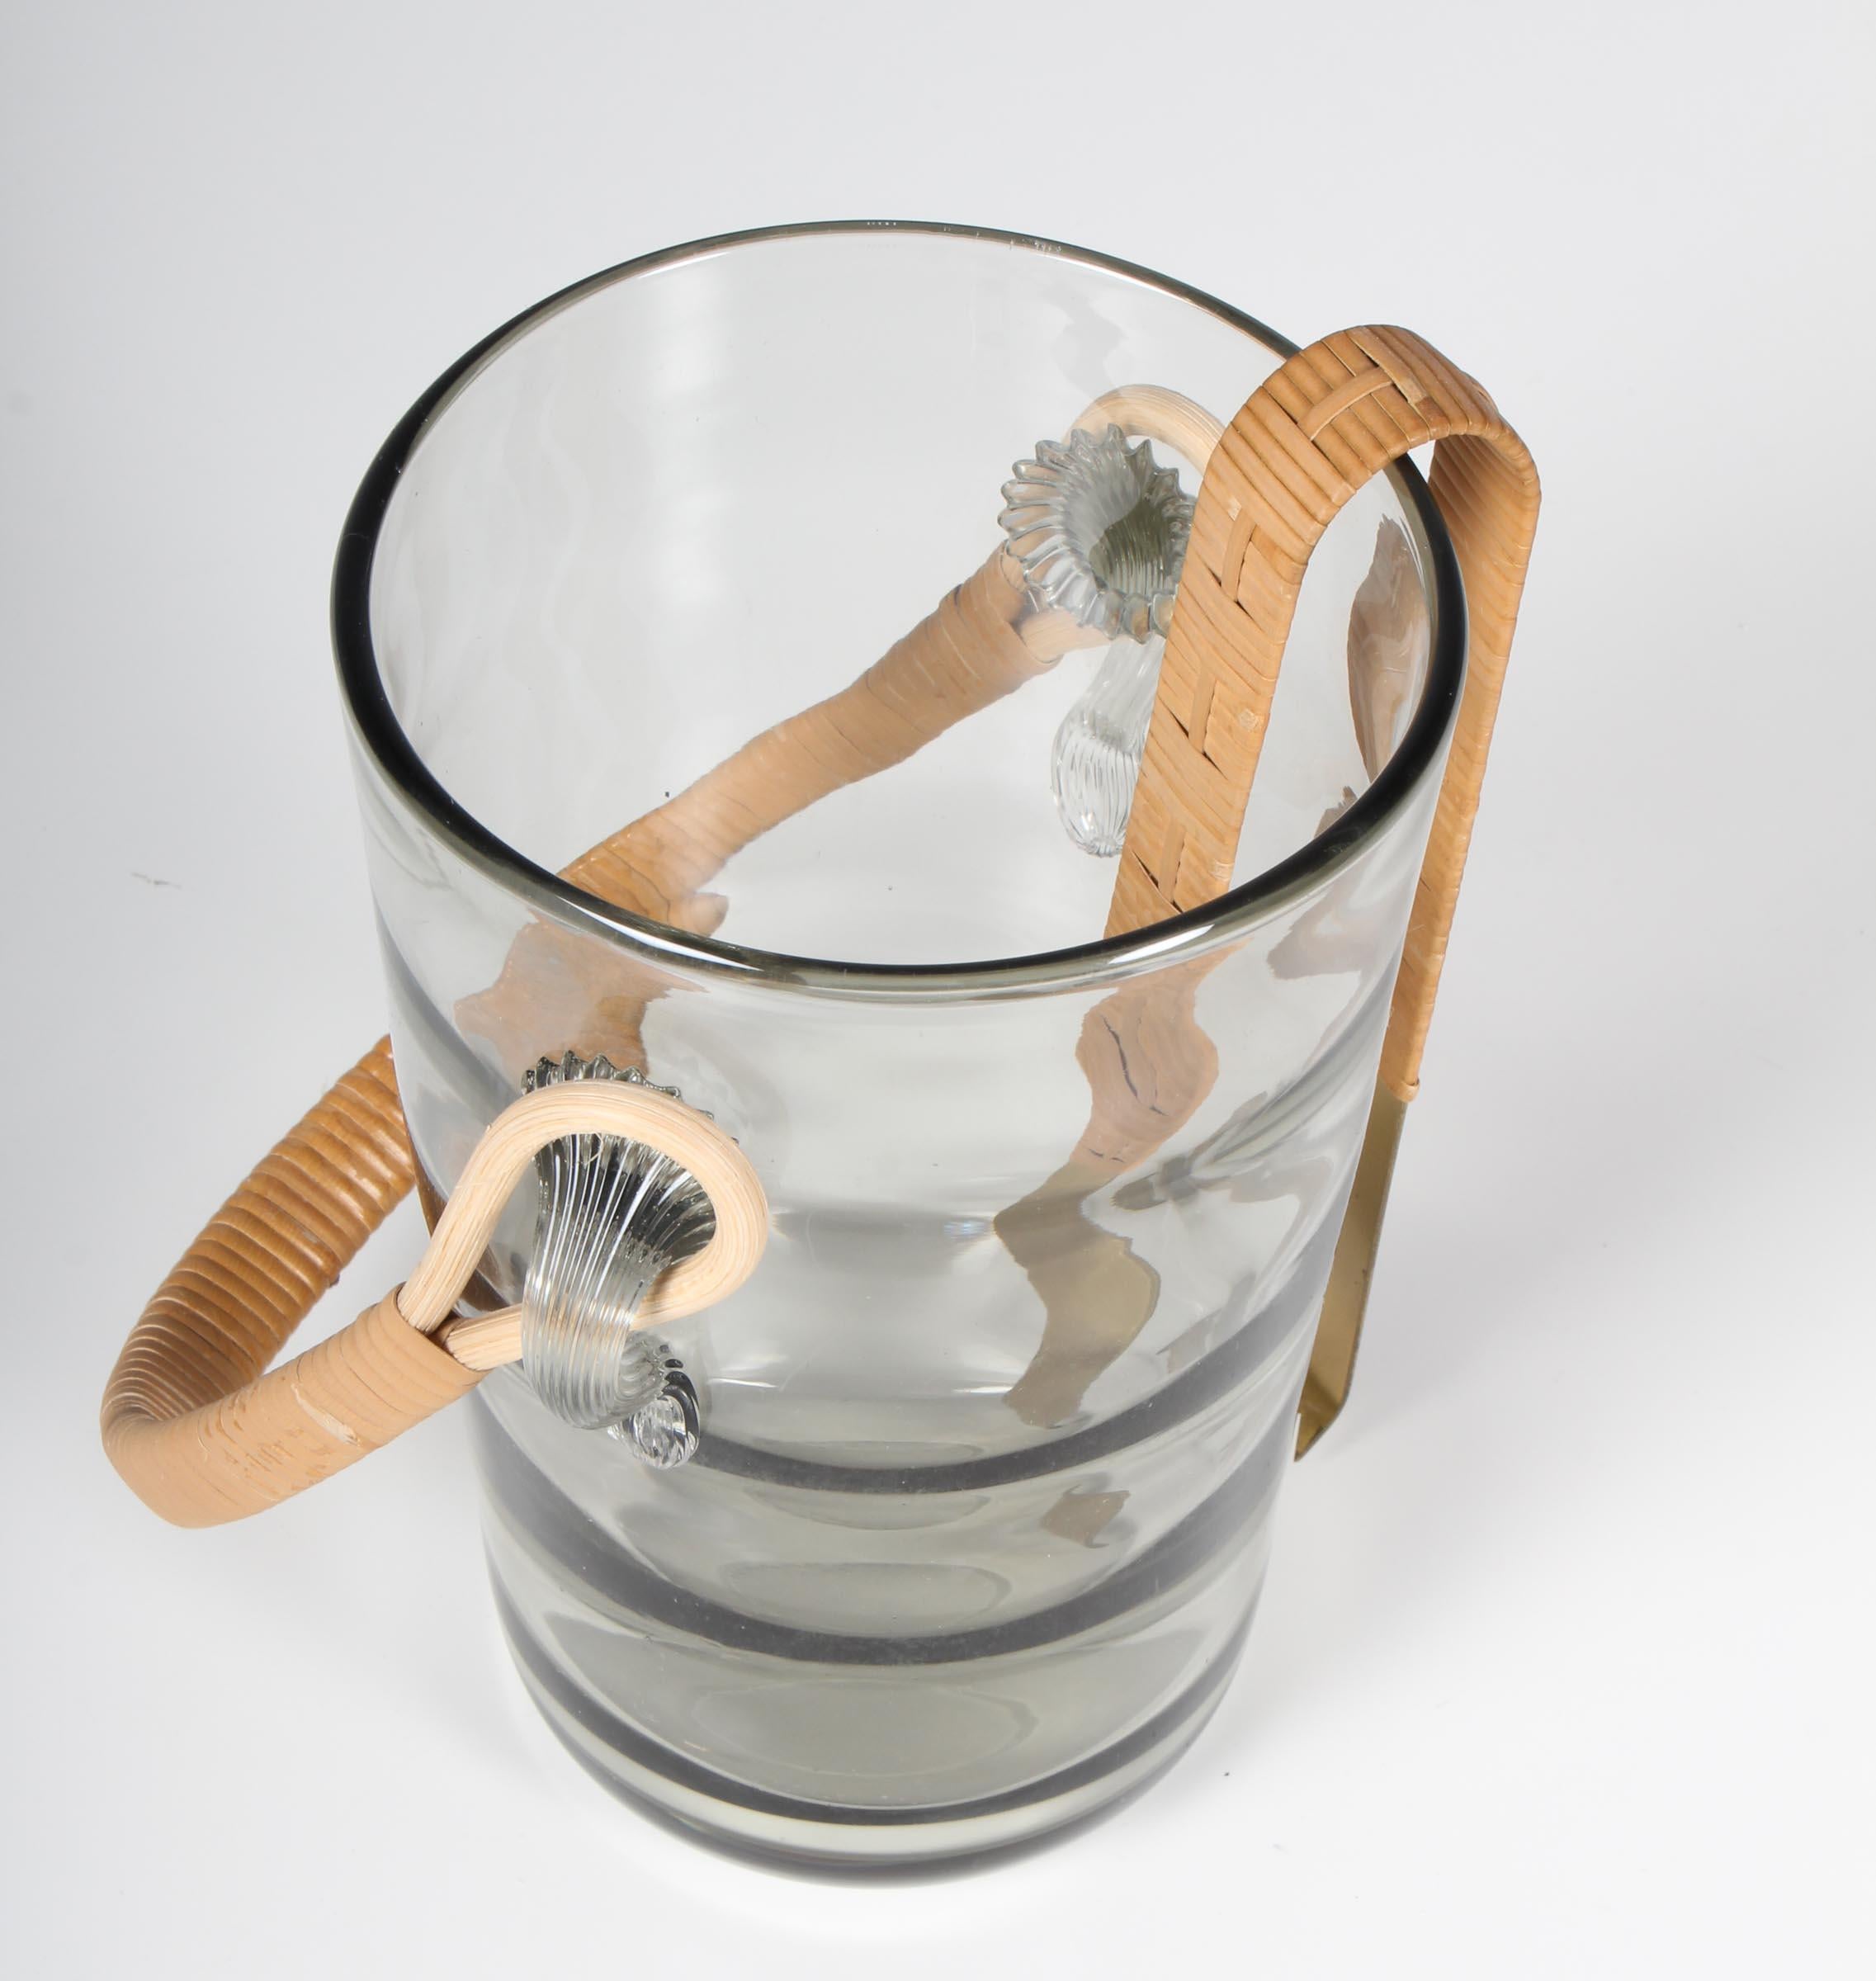 Holmegaard ice bucket in glass with cane handle. Icecube thong in brass.

Made by Holmegaard in the 1960s.